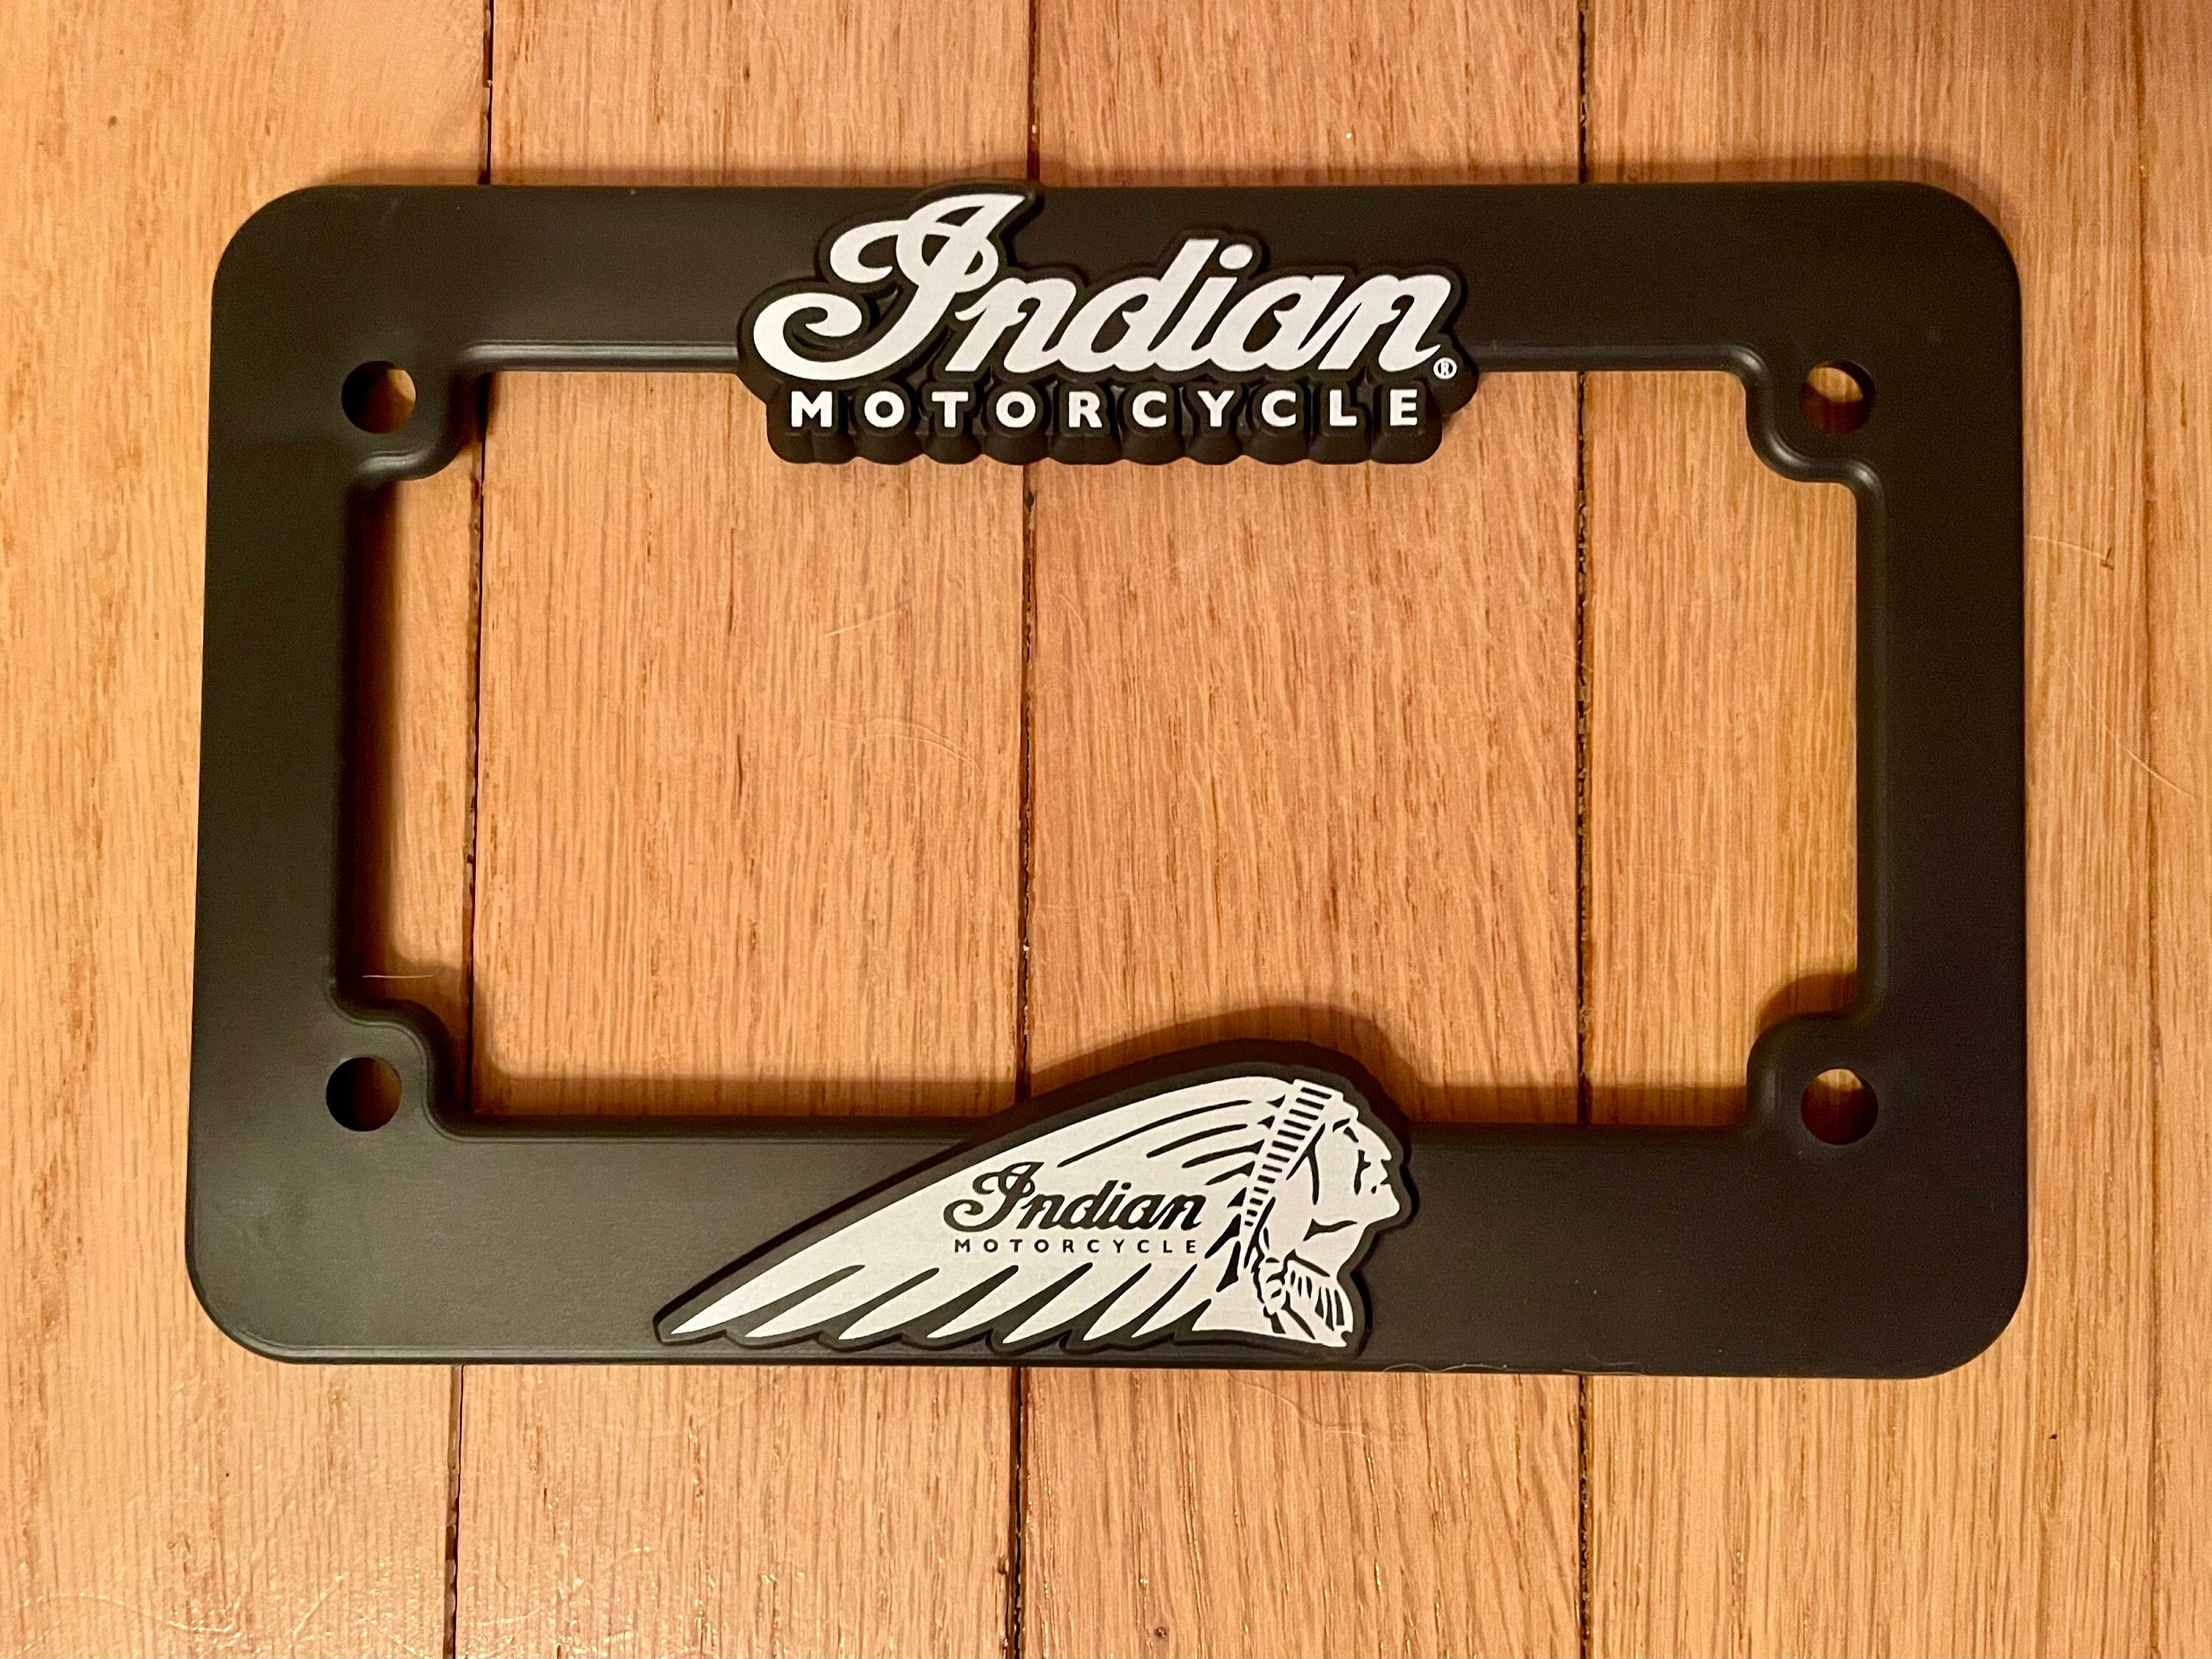 Wholesale motorcycle number plate holder For Safety Precautions